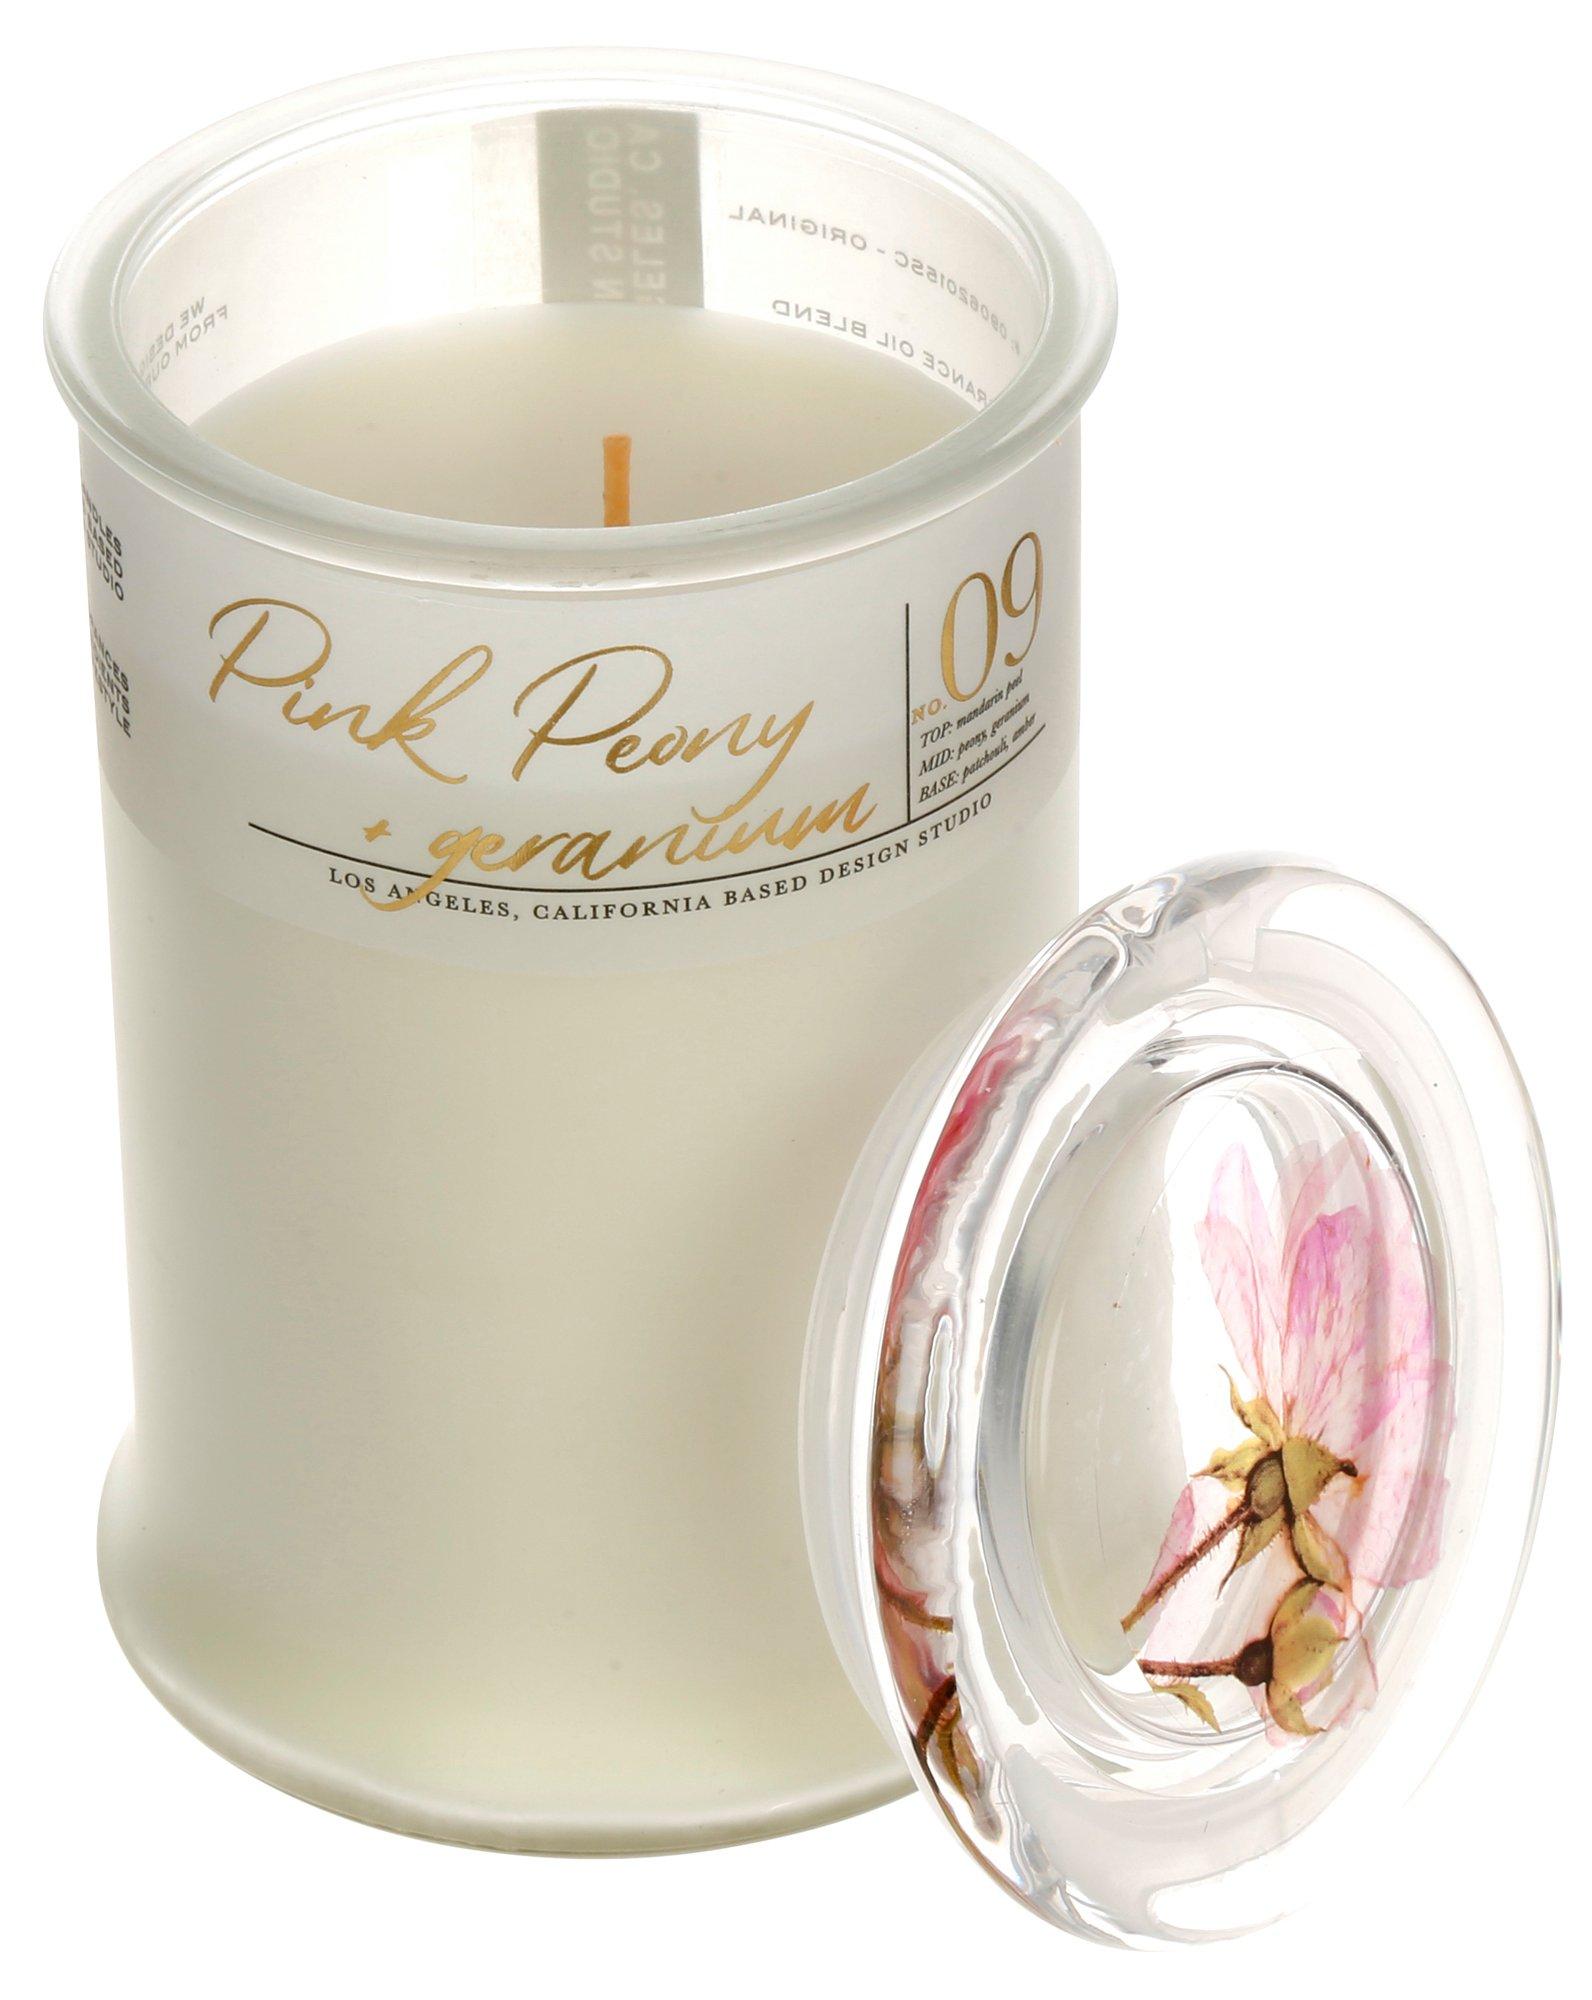 19 oz Pink Peony Scented Candle